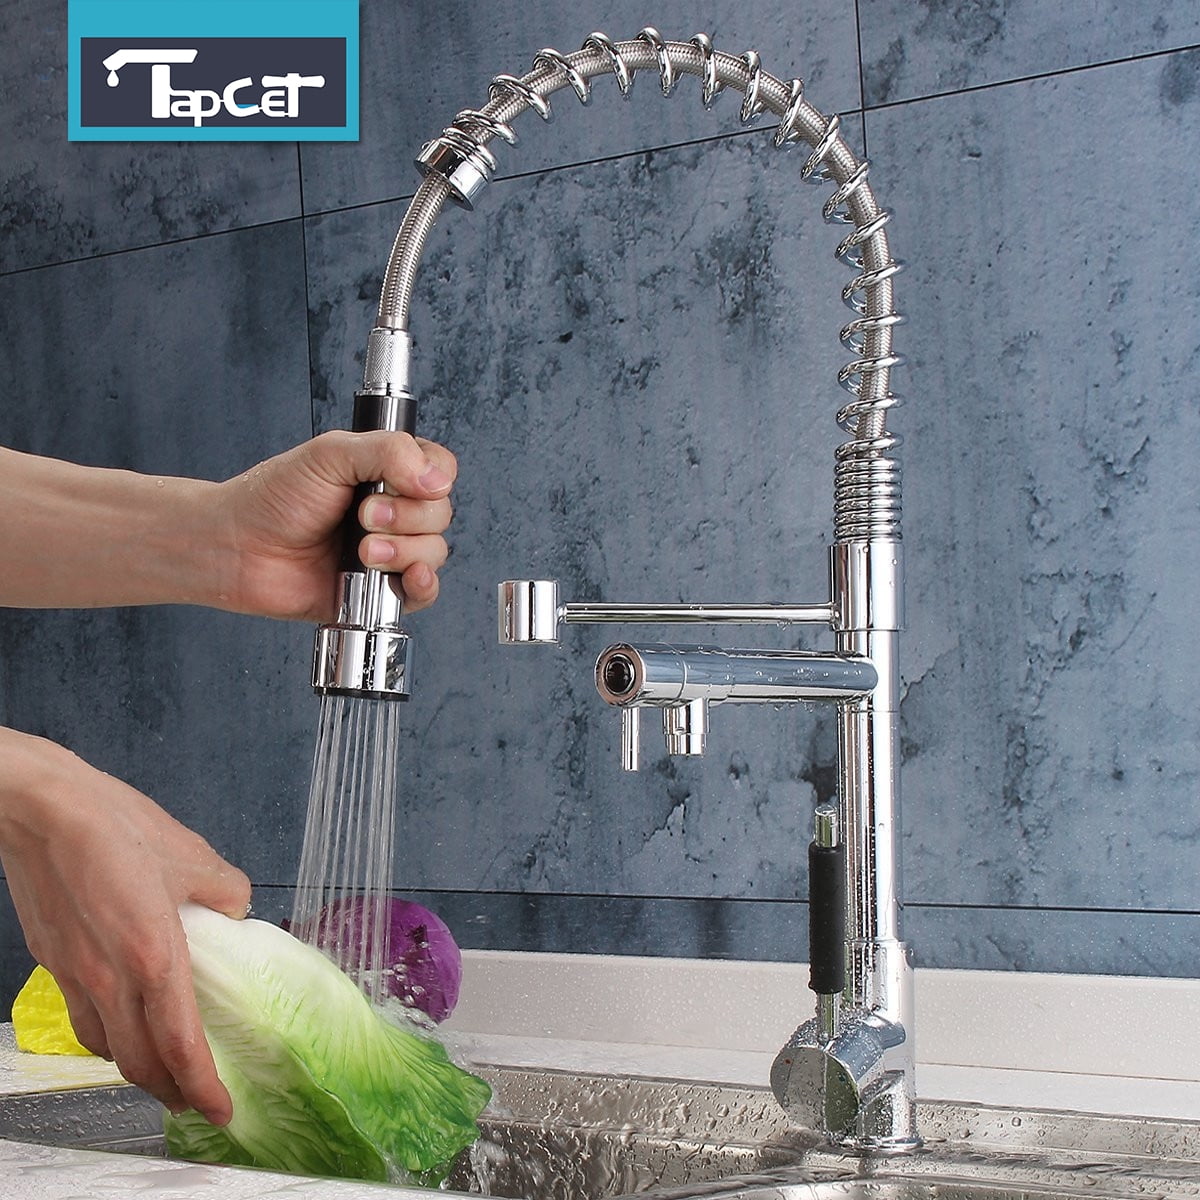 Tapcet Modern Chrome Finish Pull Out Spring Kitchen Faucet Rotating Spout Sink Mixer Tap Walmartcom Walmartcom